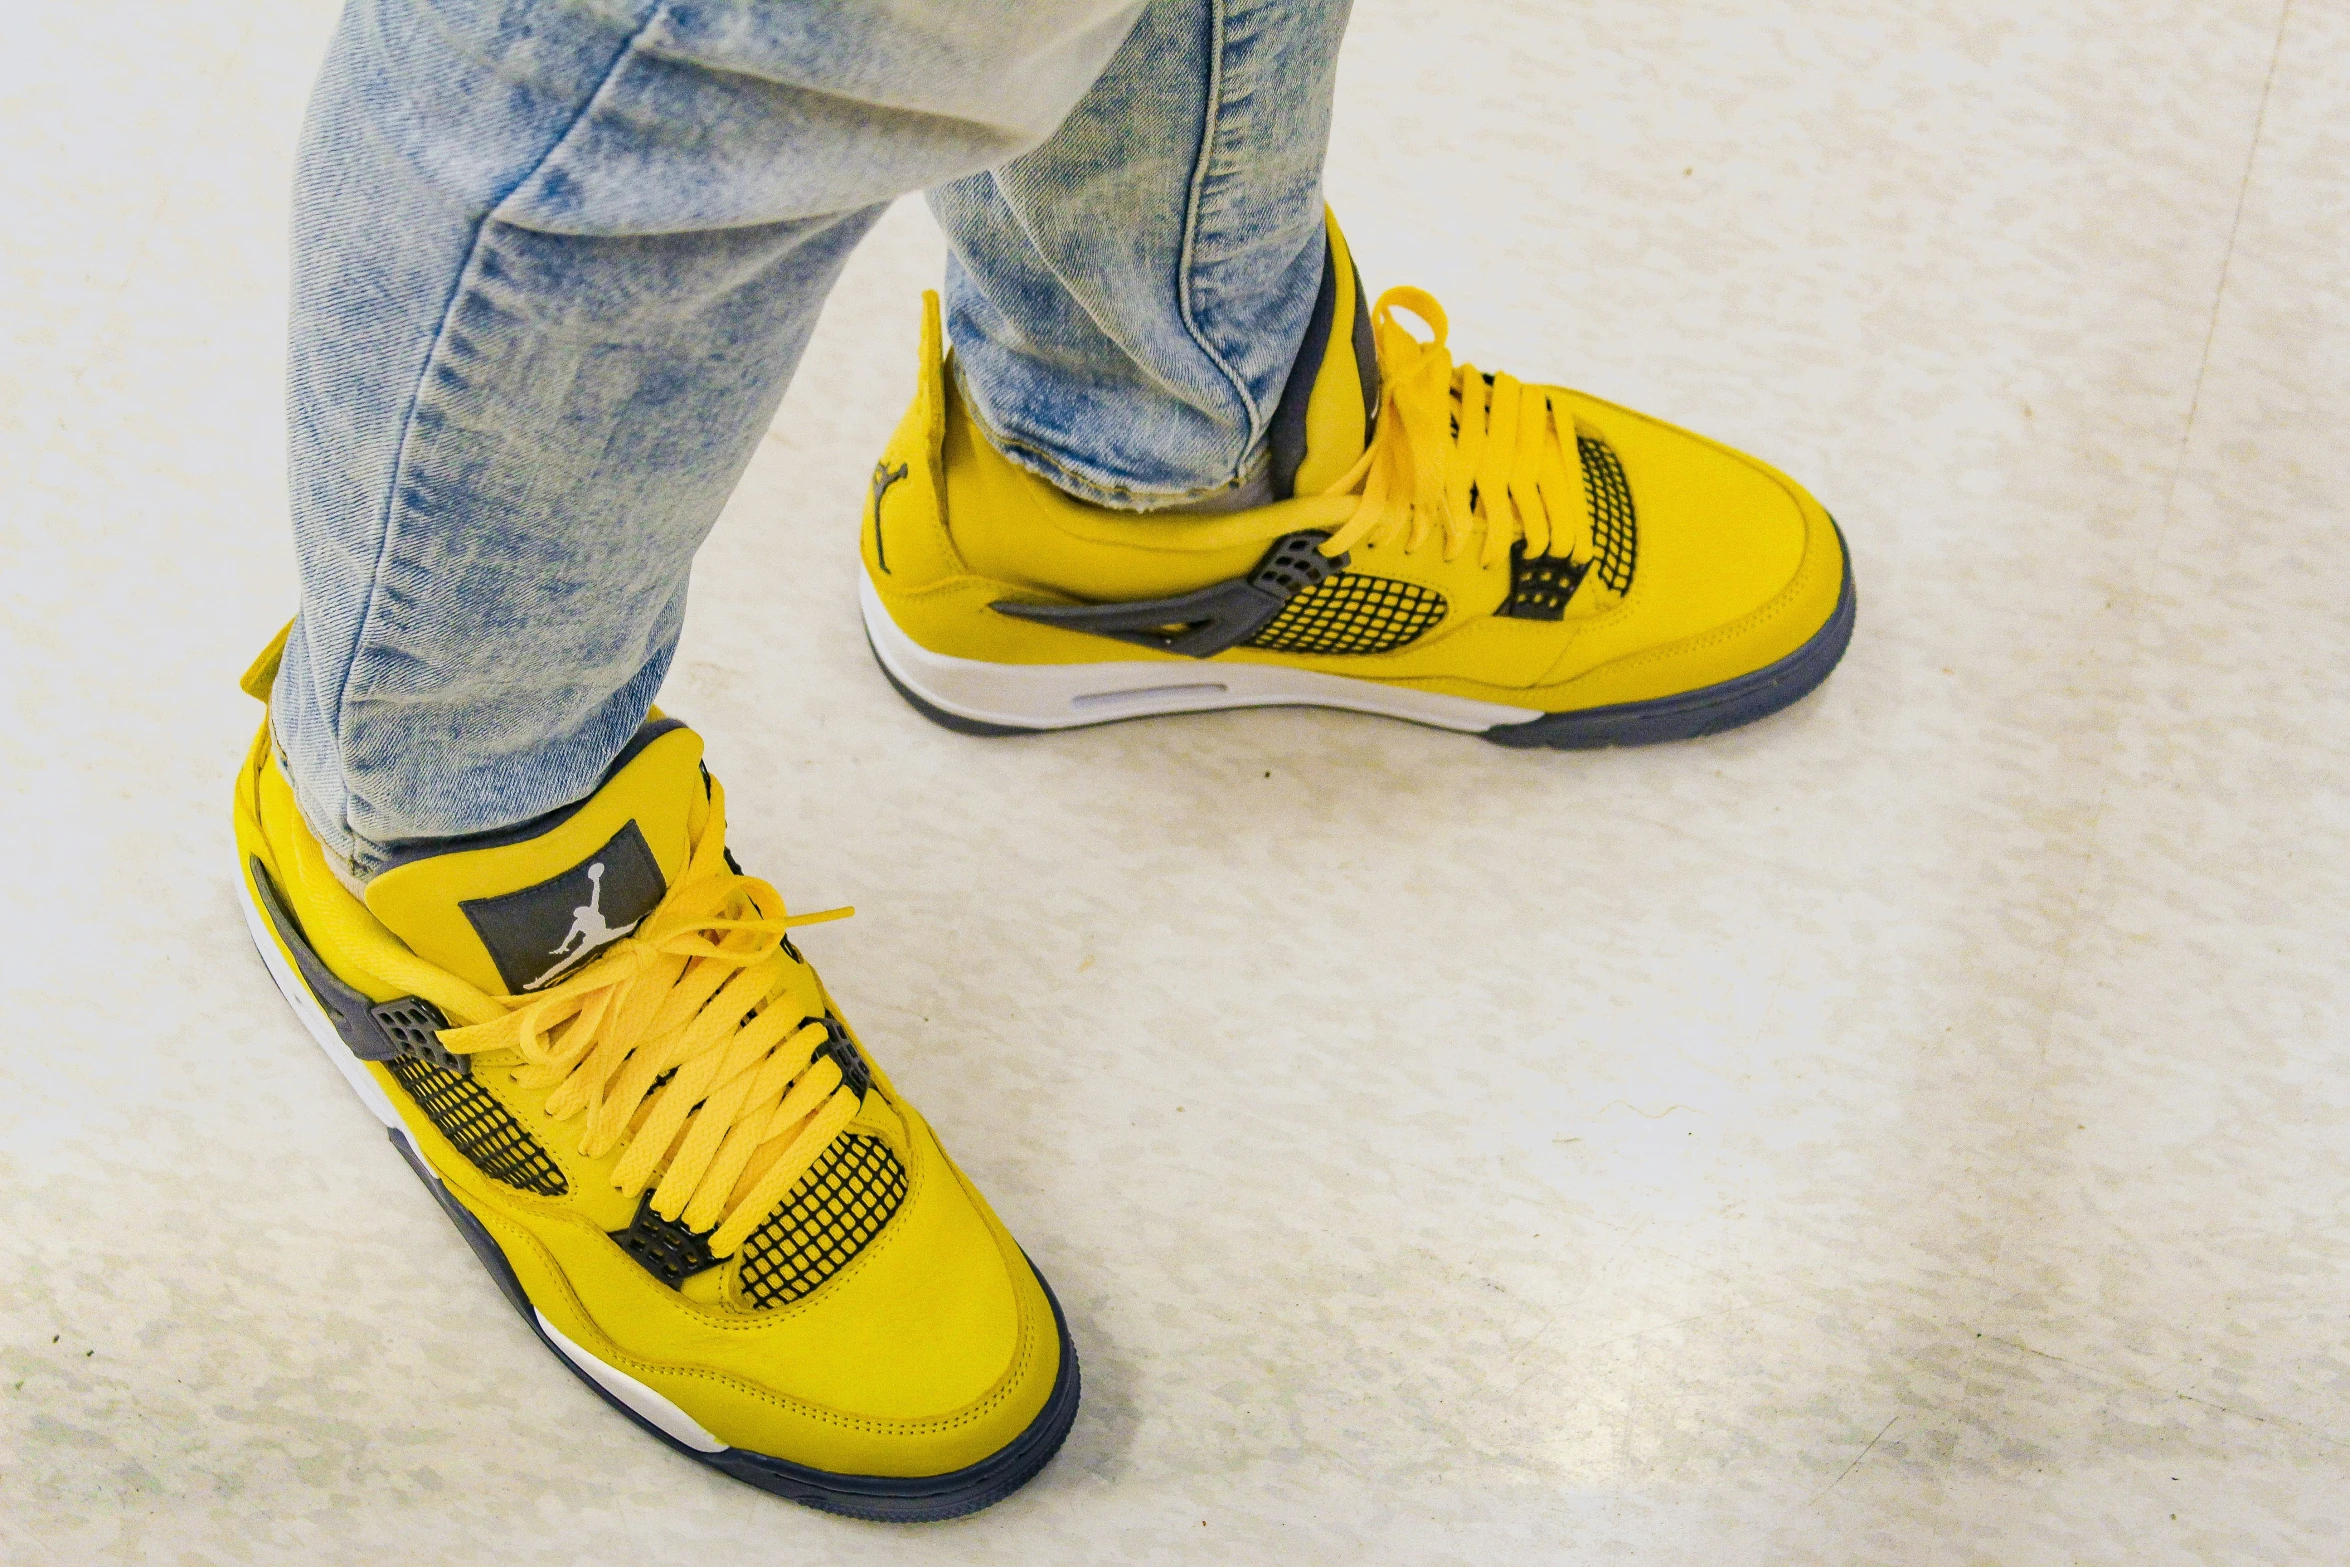 a person in jeans and sneakers is wearing yellow shoes